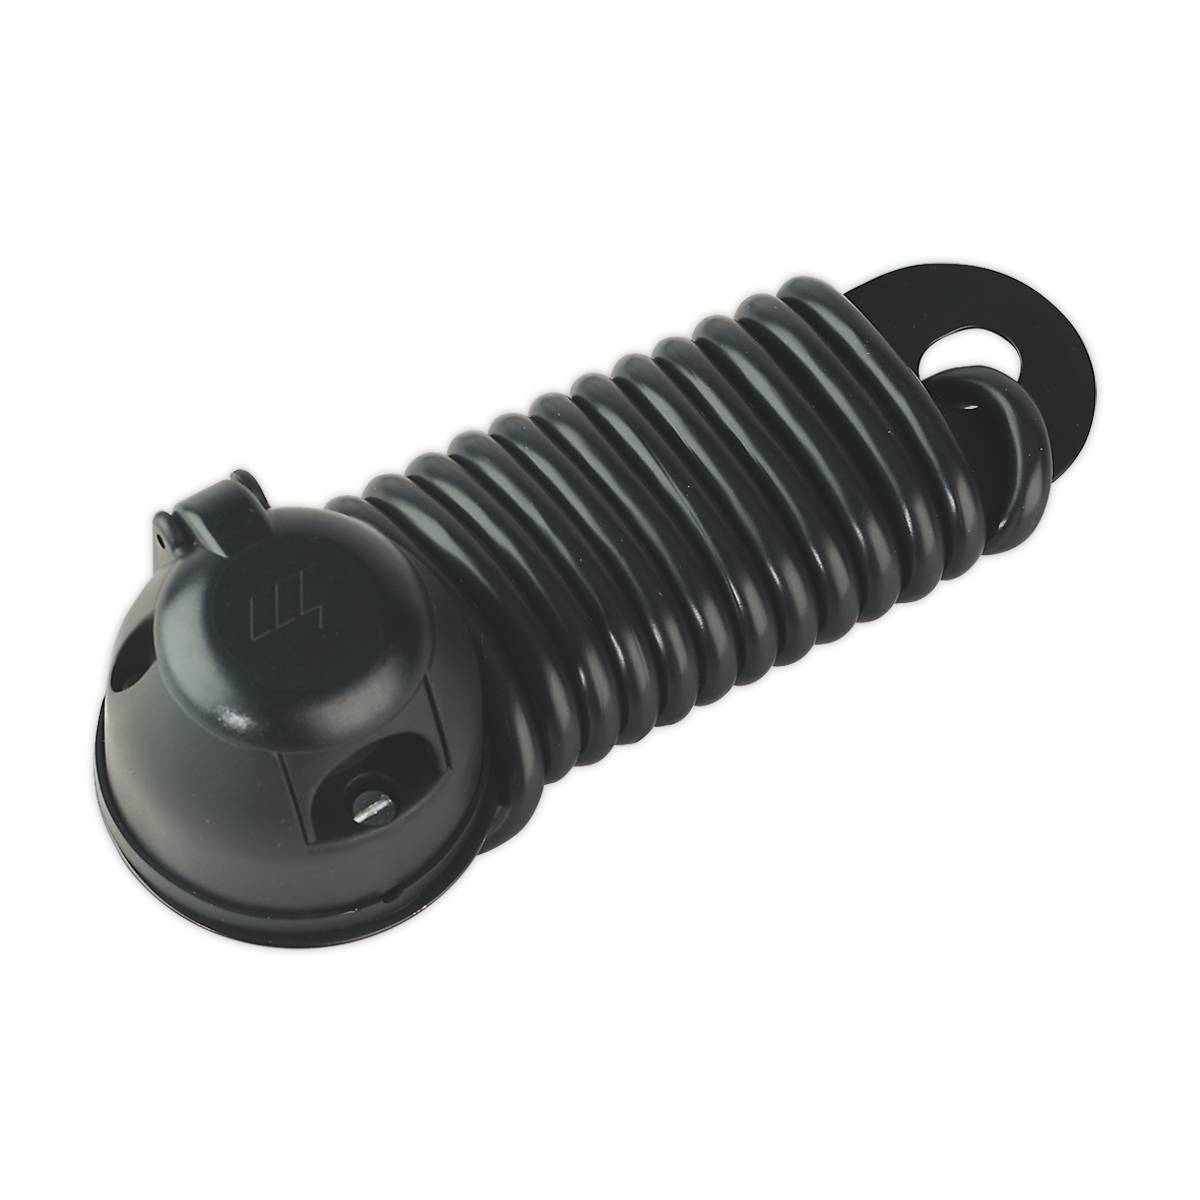 Sealey Towing Socket Assembly N-Type 12V